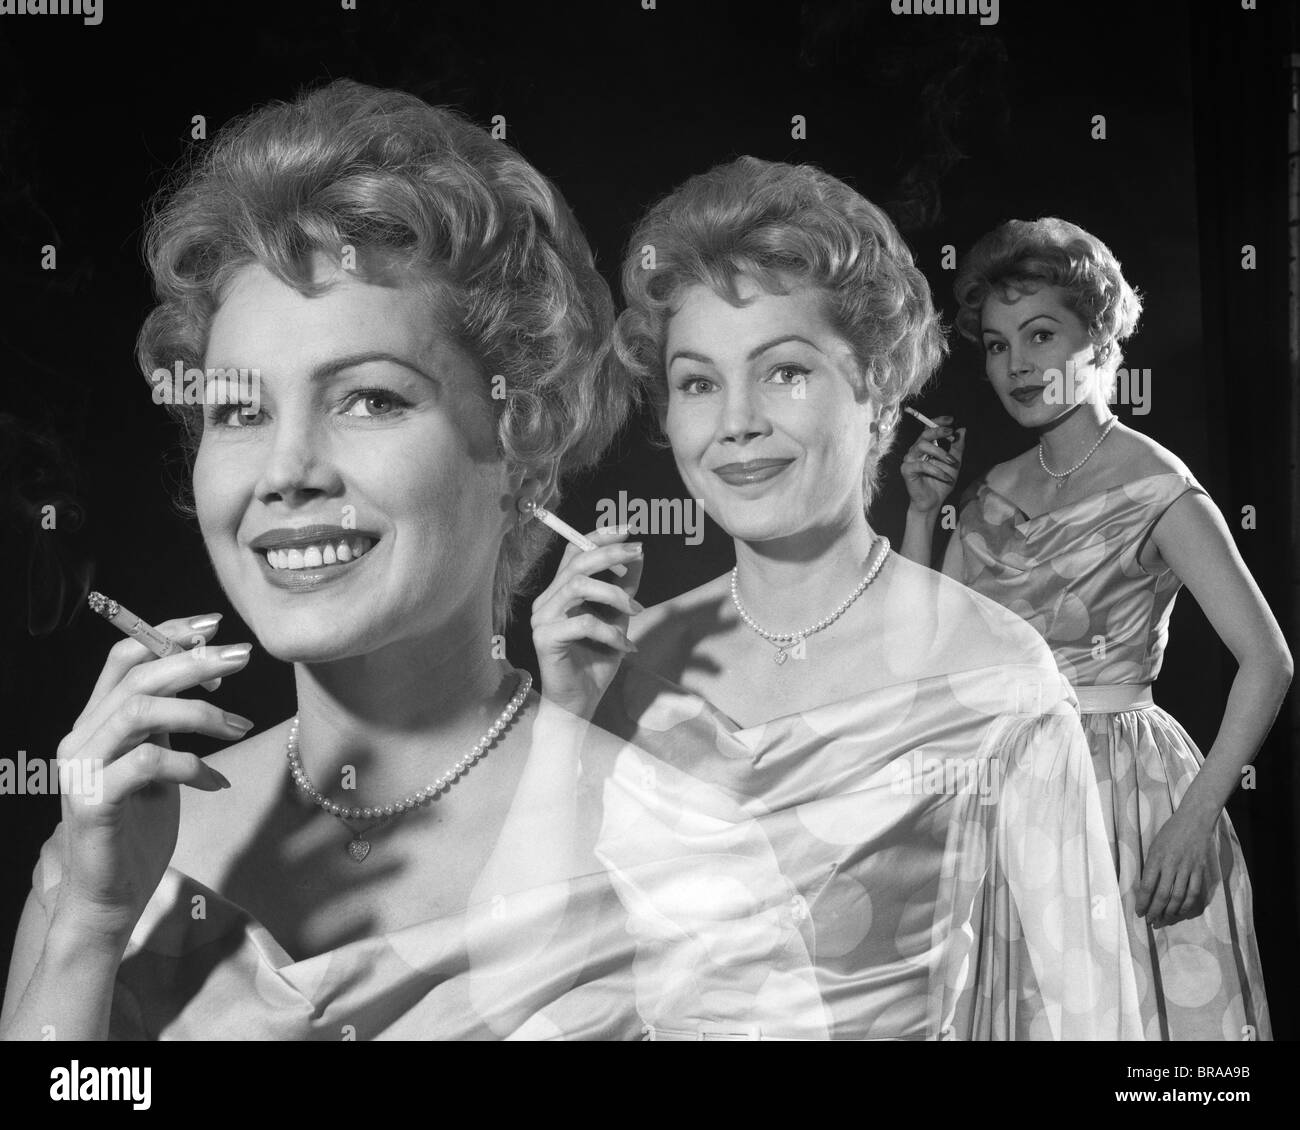 1950s MULTIPLE EXPOSURE OF SMILING WOMAN SMOKING A CIGARETTE 3 SEPARATE VIEWS Stock Photo